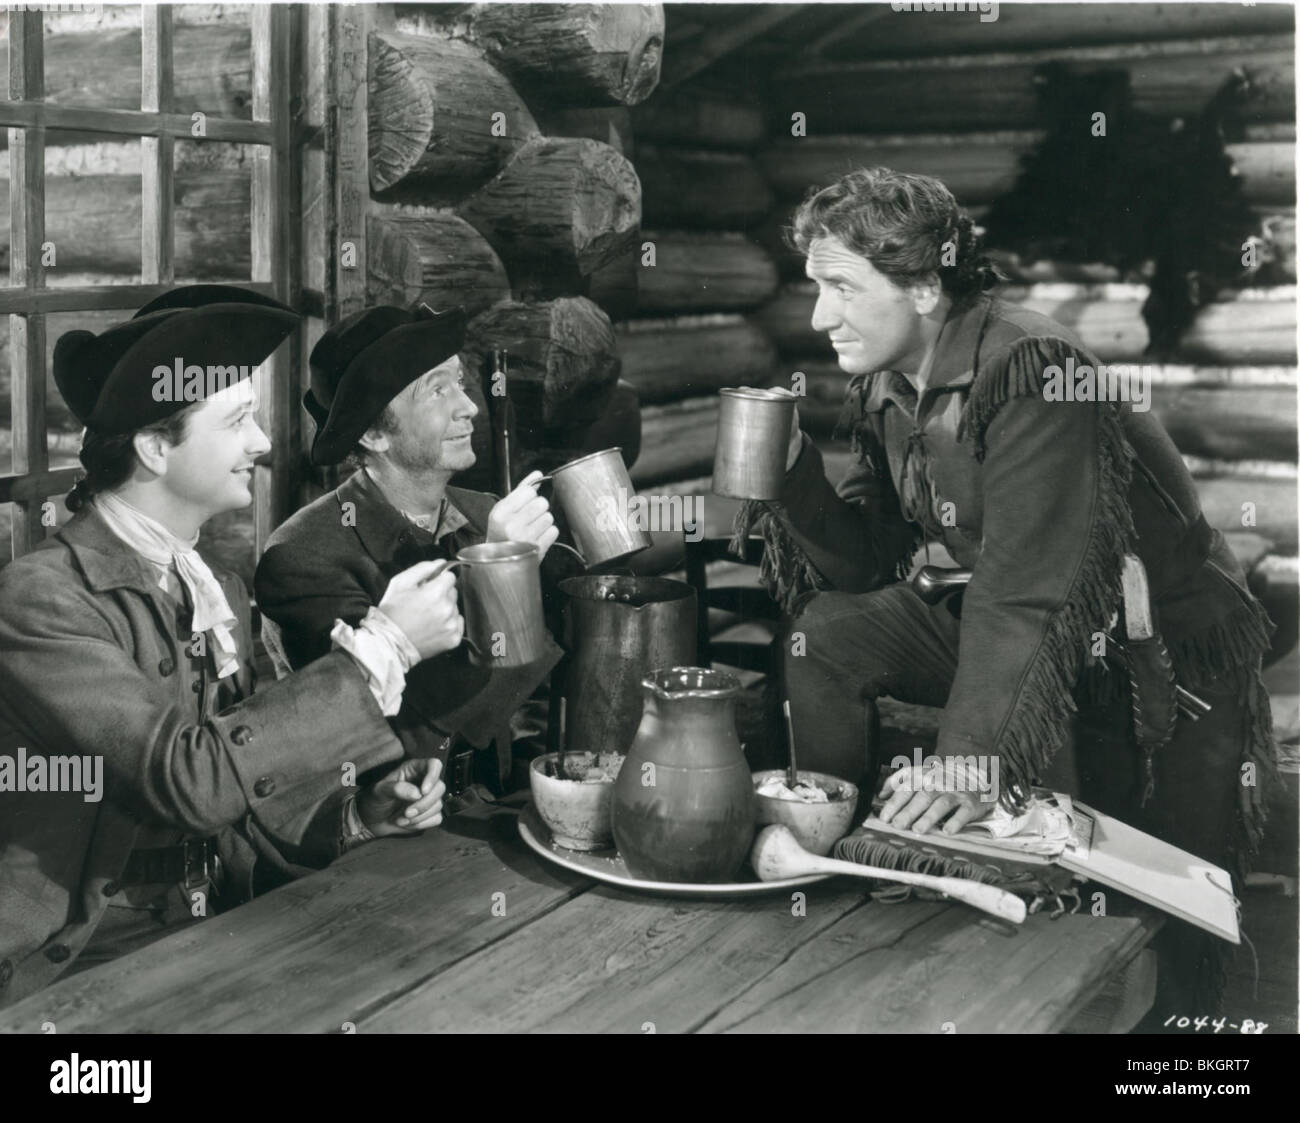 NORTHWEST PASSAGE (1940) ROBERT YOUNG, WALTER BRENNAN, SPENCER TRACY NWP 008P Stock Photo